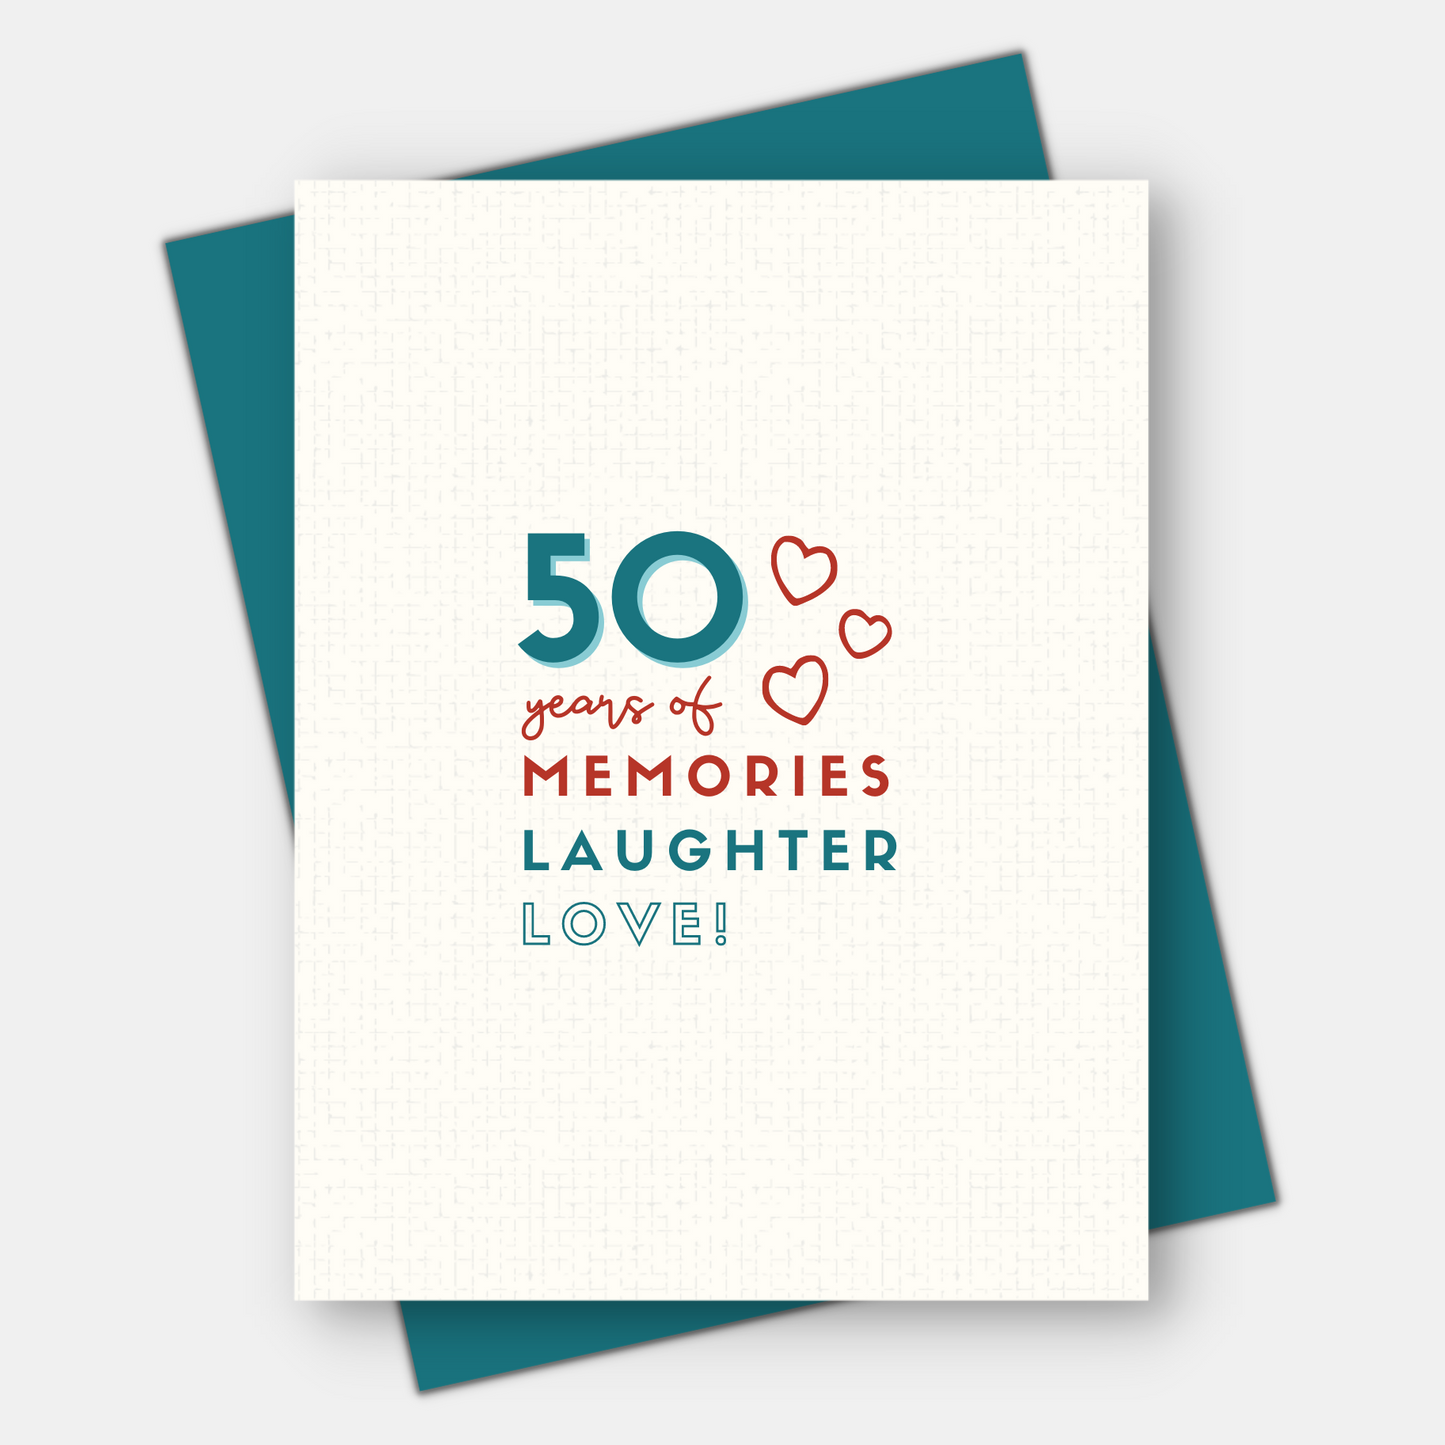 Years of memories, laughter, love, for 50th, 60th, 70th, 80th, 90th, 100th birthday